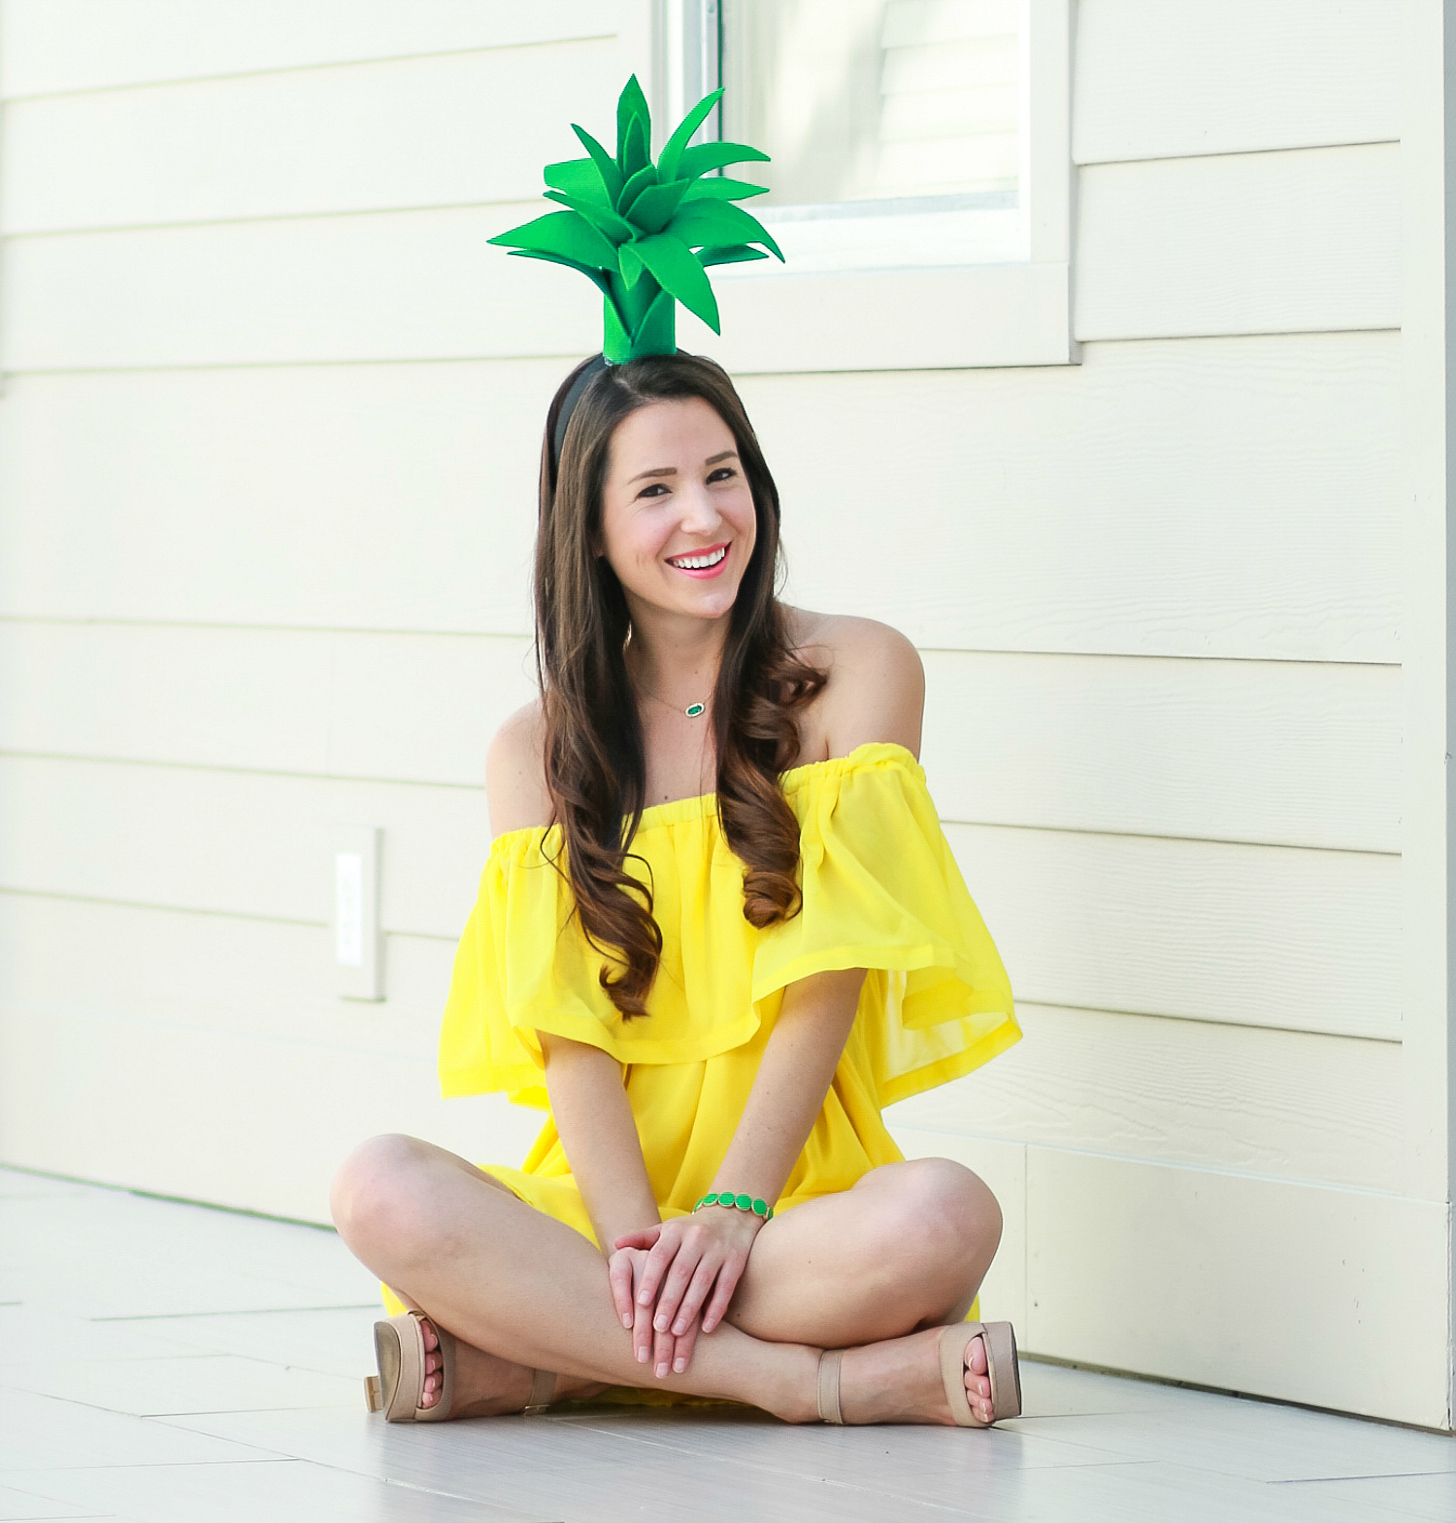 DIY Pineapple Costume That Costs Less Than $3 to Make